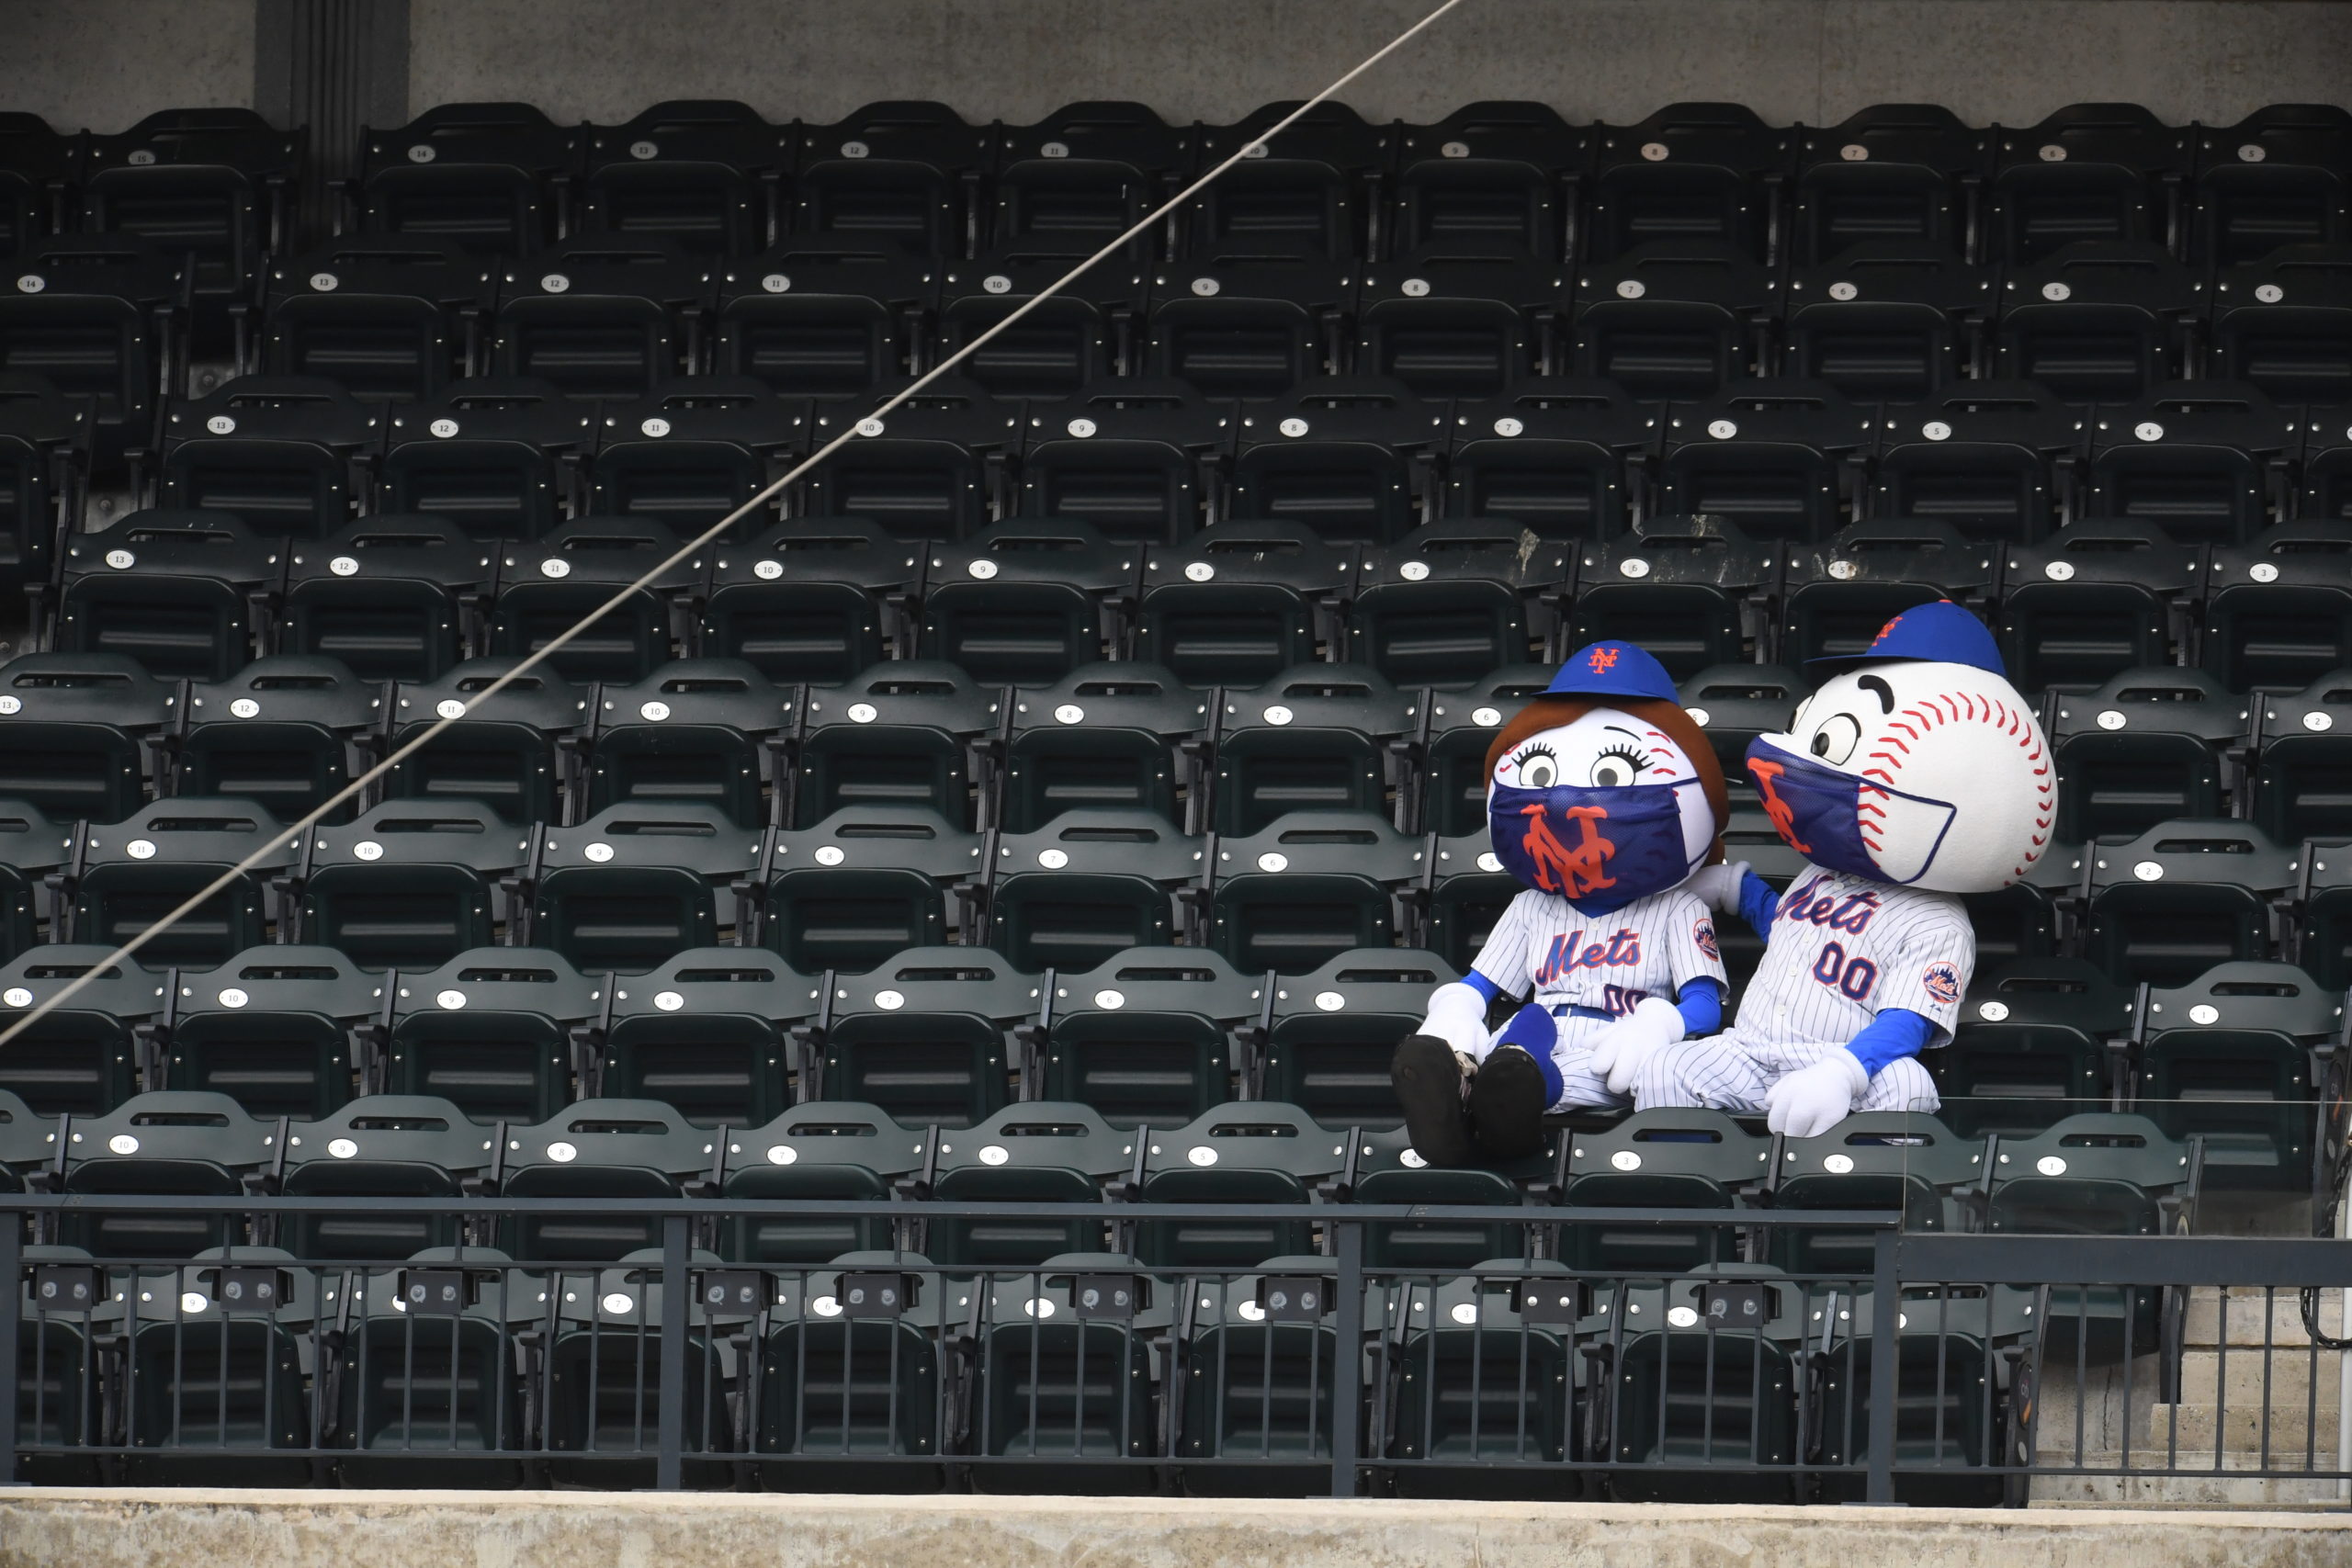 Mr. & Mrs. Met Sit Alone in Stands During COVID